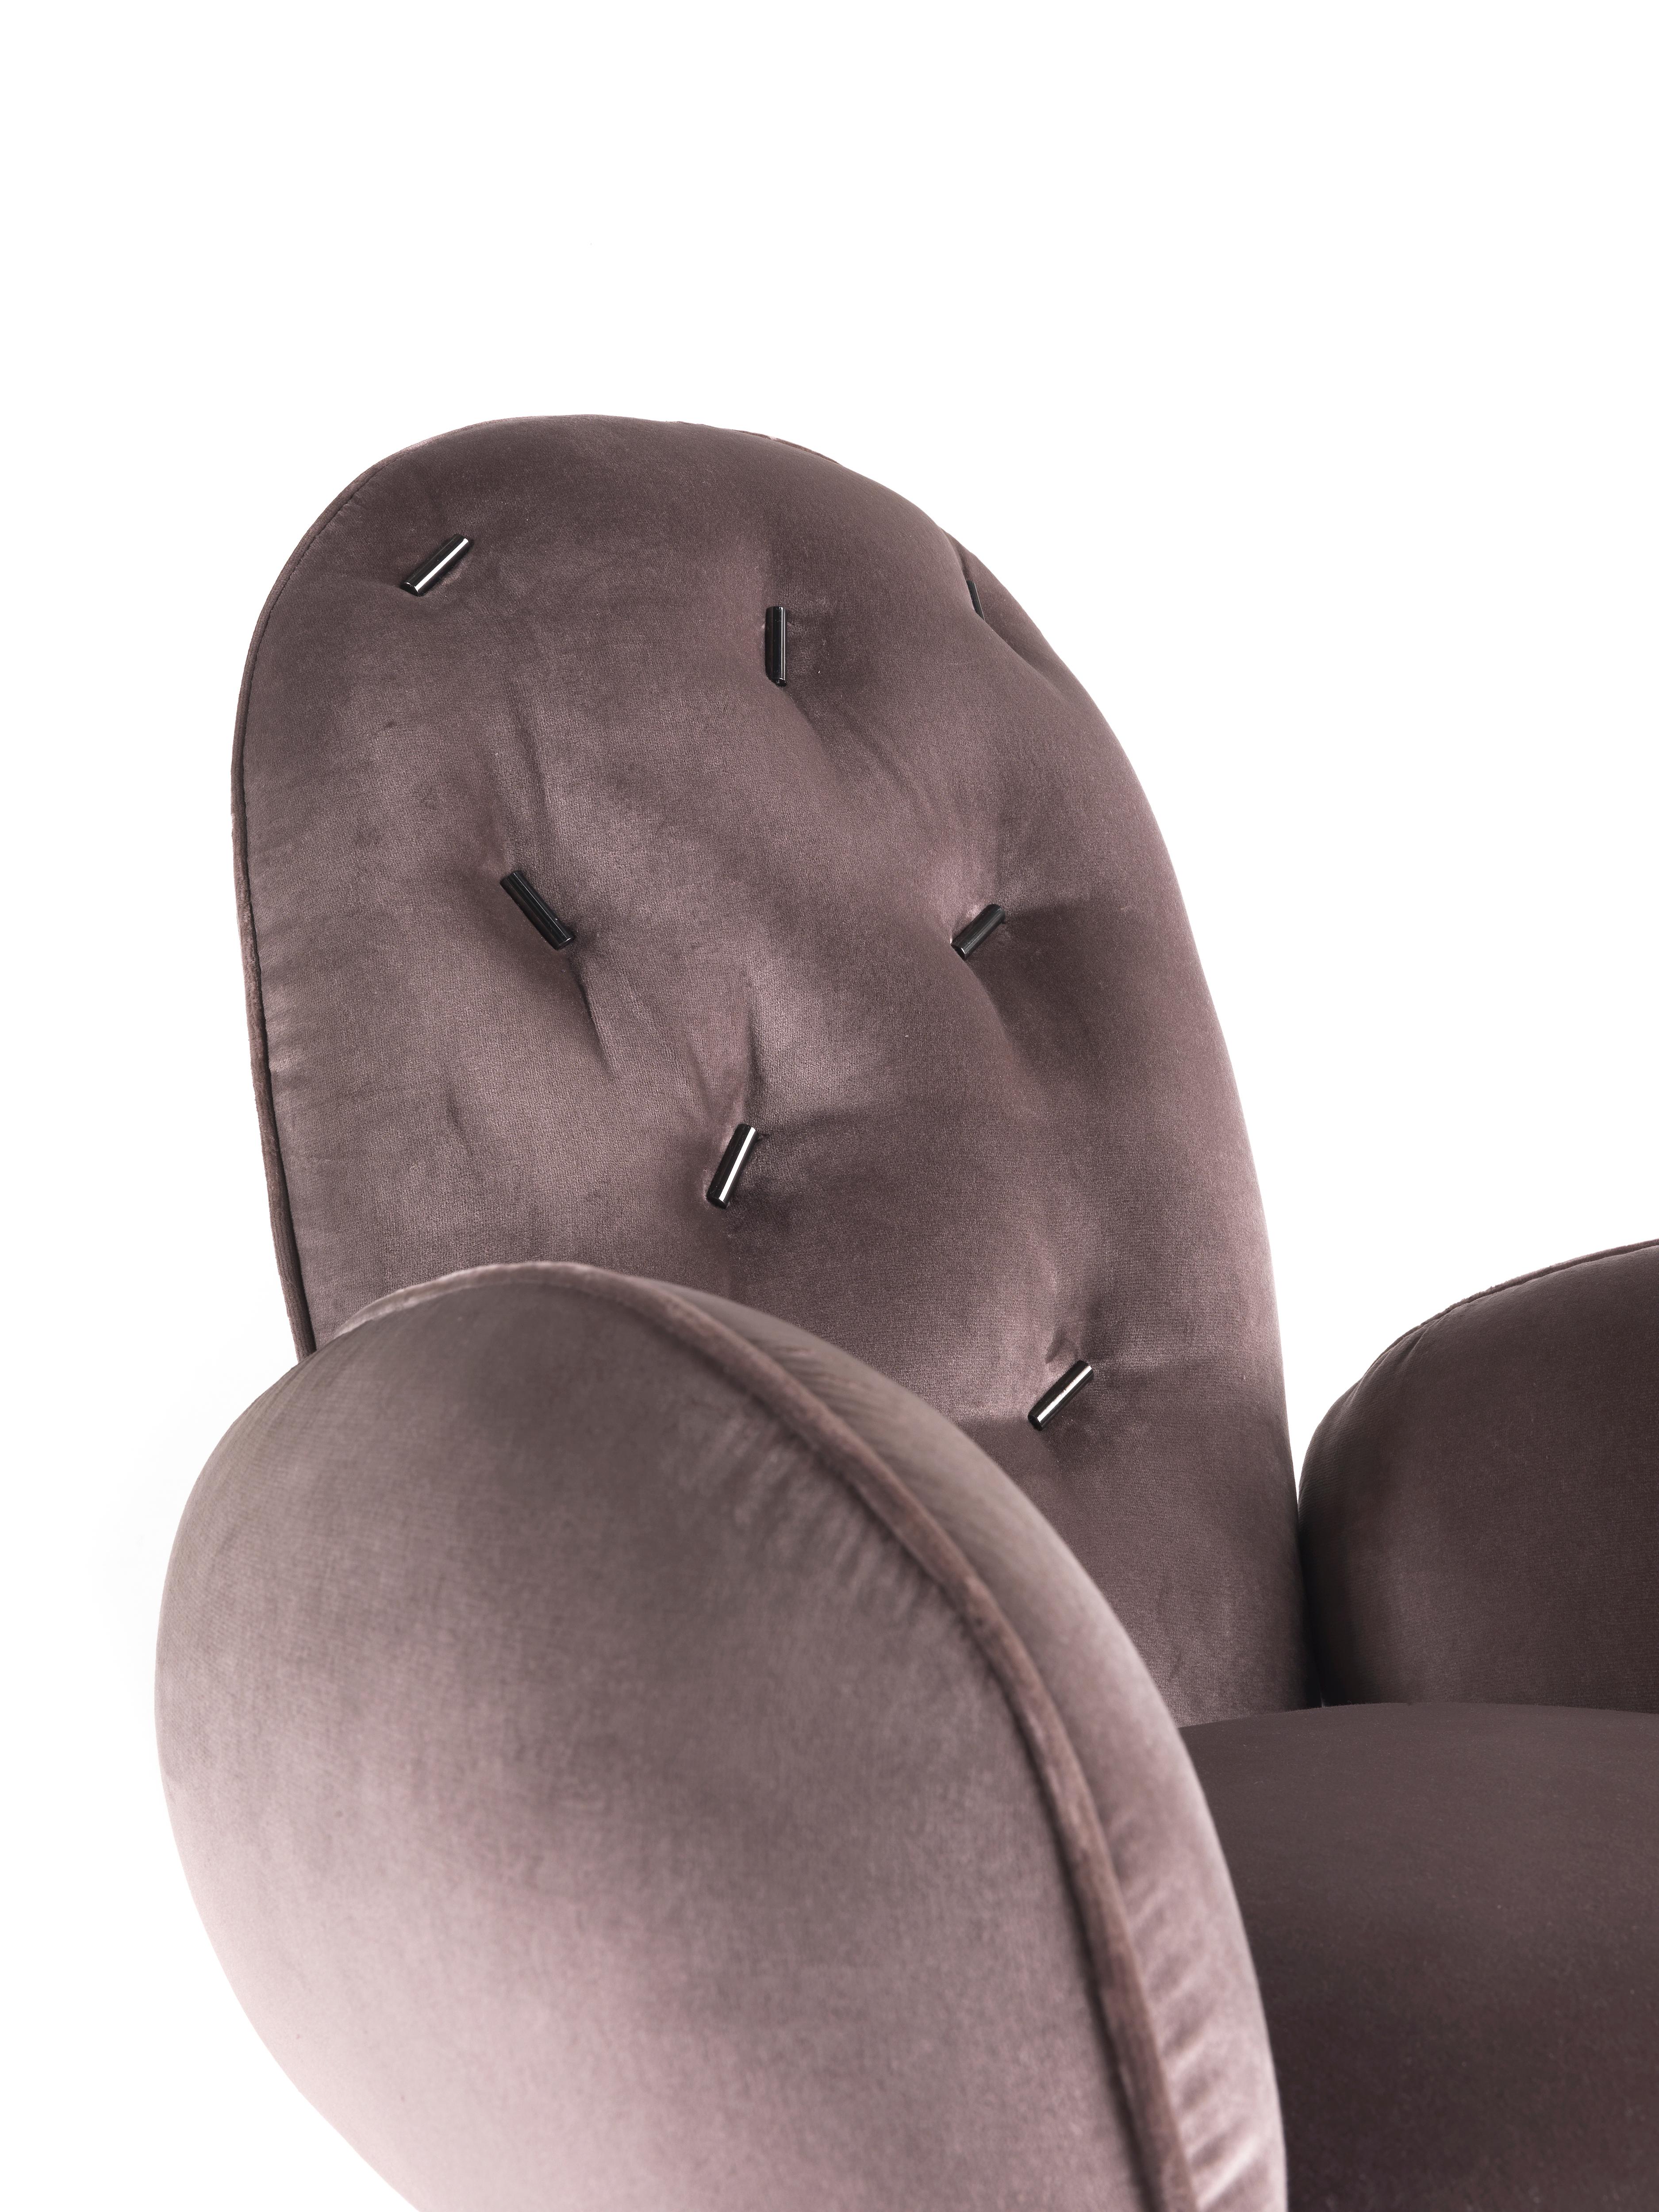 Modern 21st Century Ttemic Chair with Arms in Lavender Velvet by Matteo Cibic For Sale